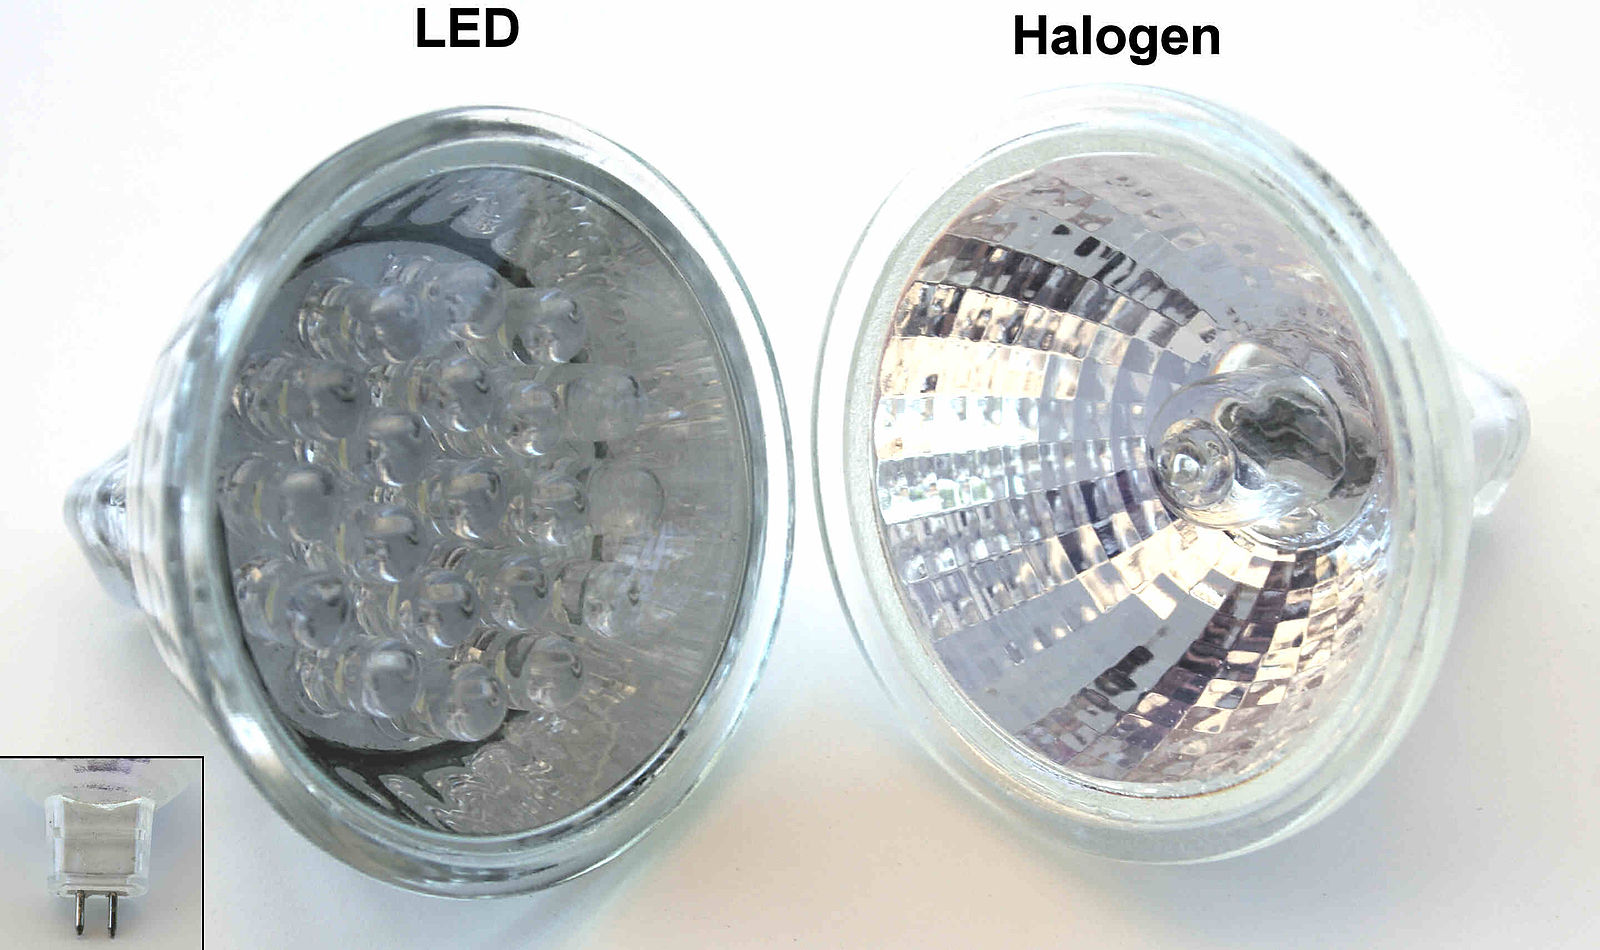 Difference Between LED and Halogen